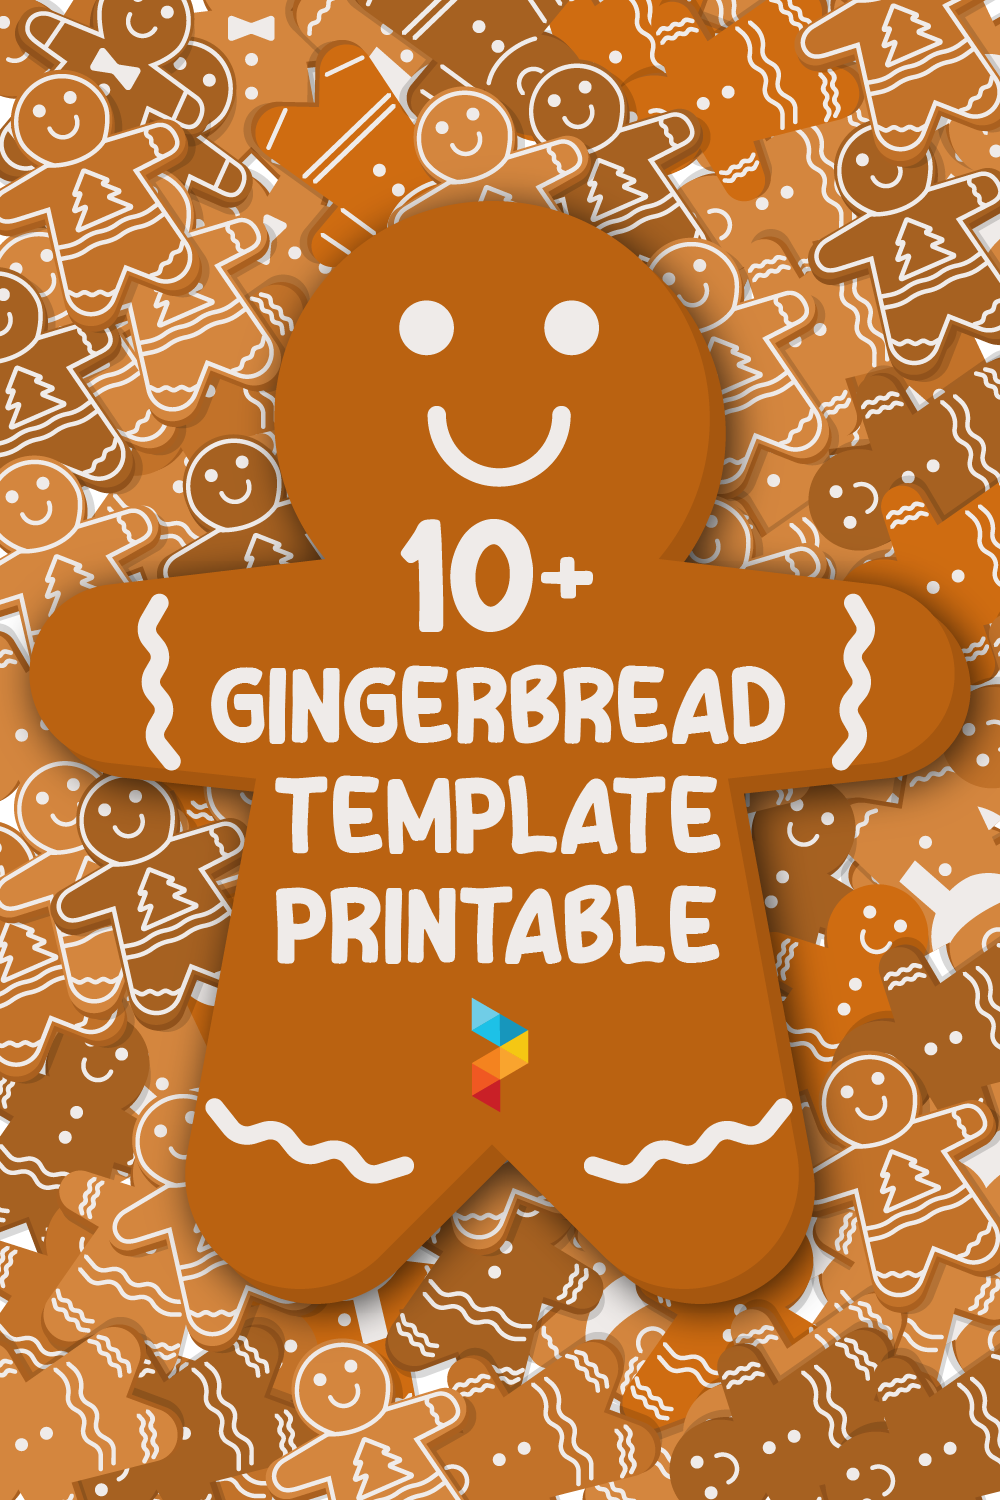 Gingerbread Template